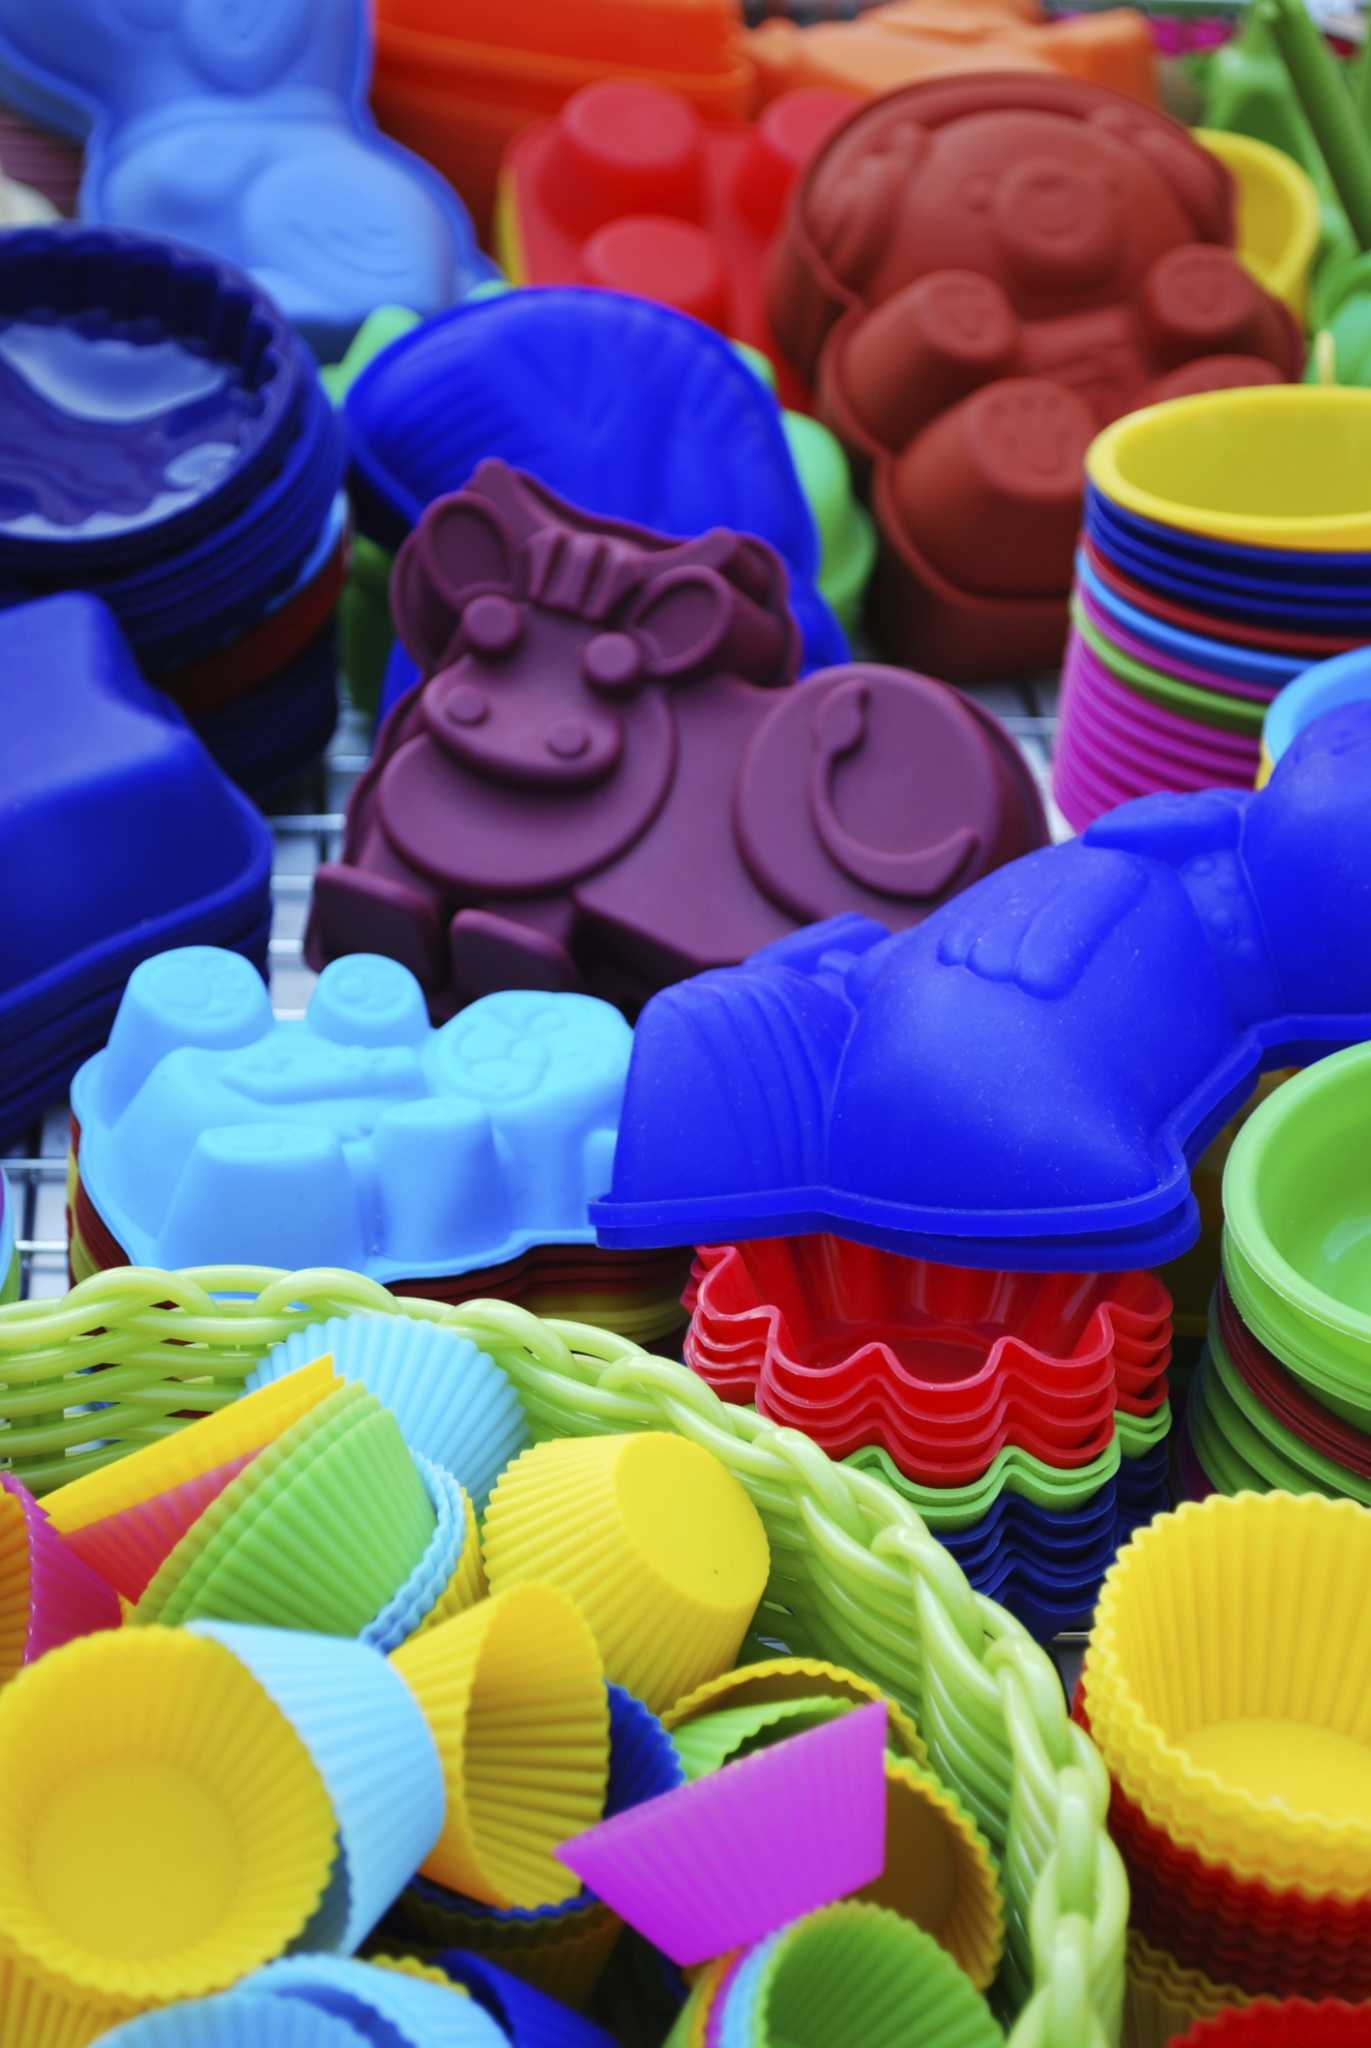 THE PROS AND CONS OF SILICONE BAKEWARE - Bakers Love